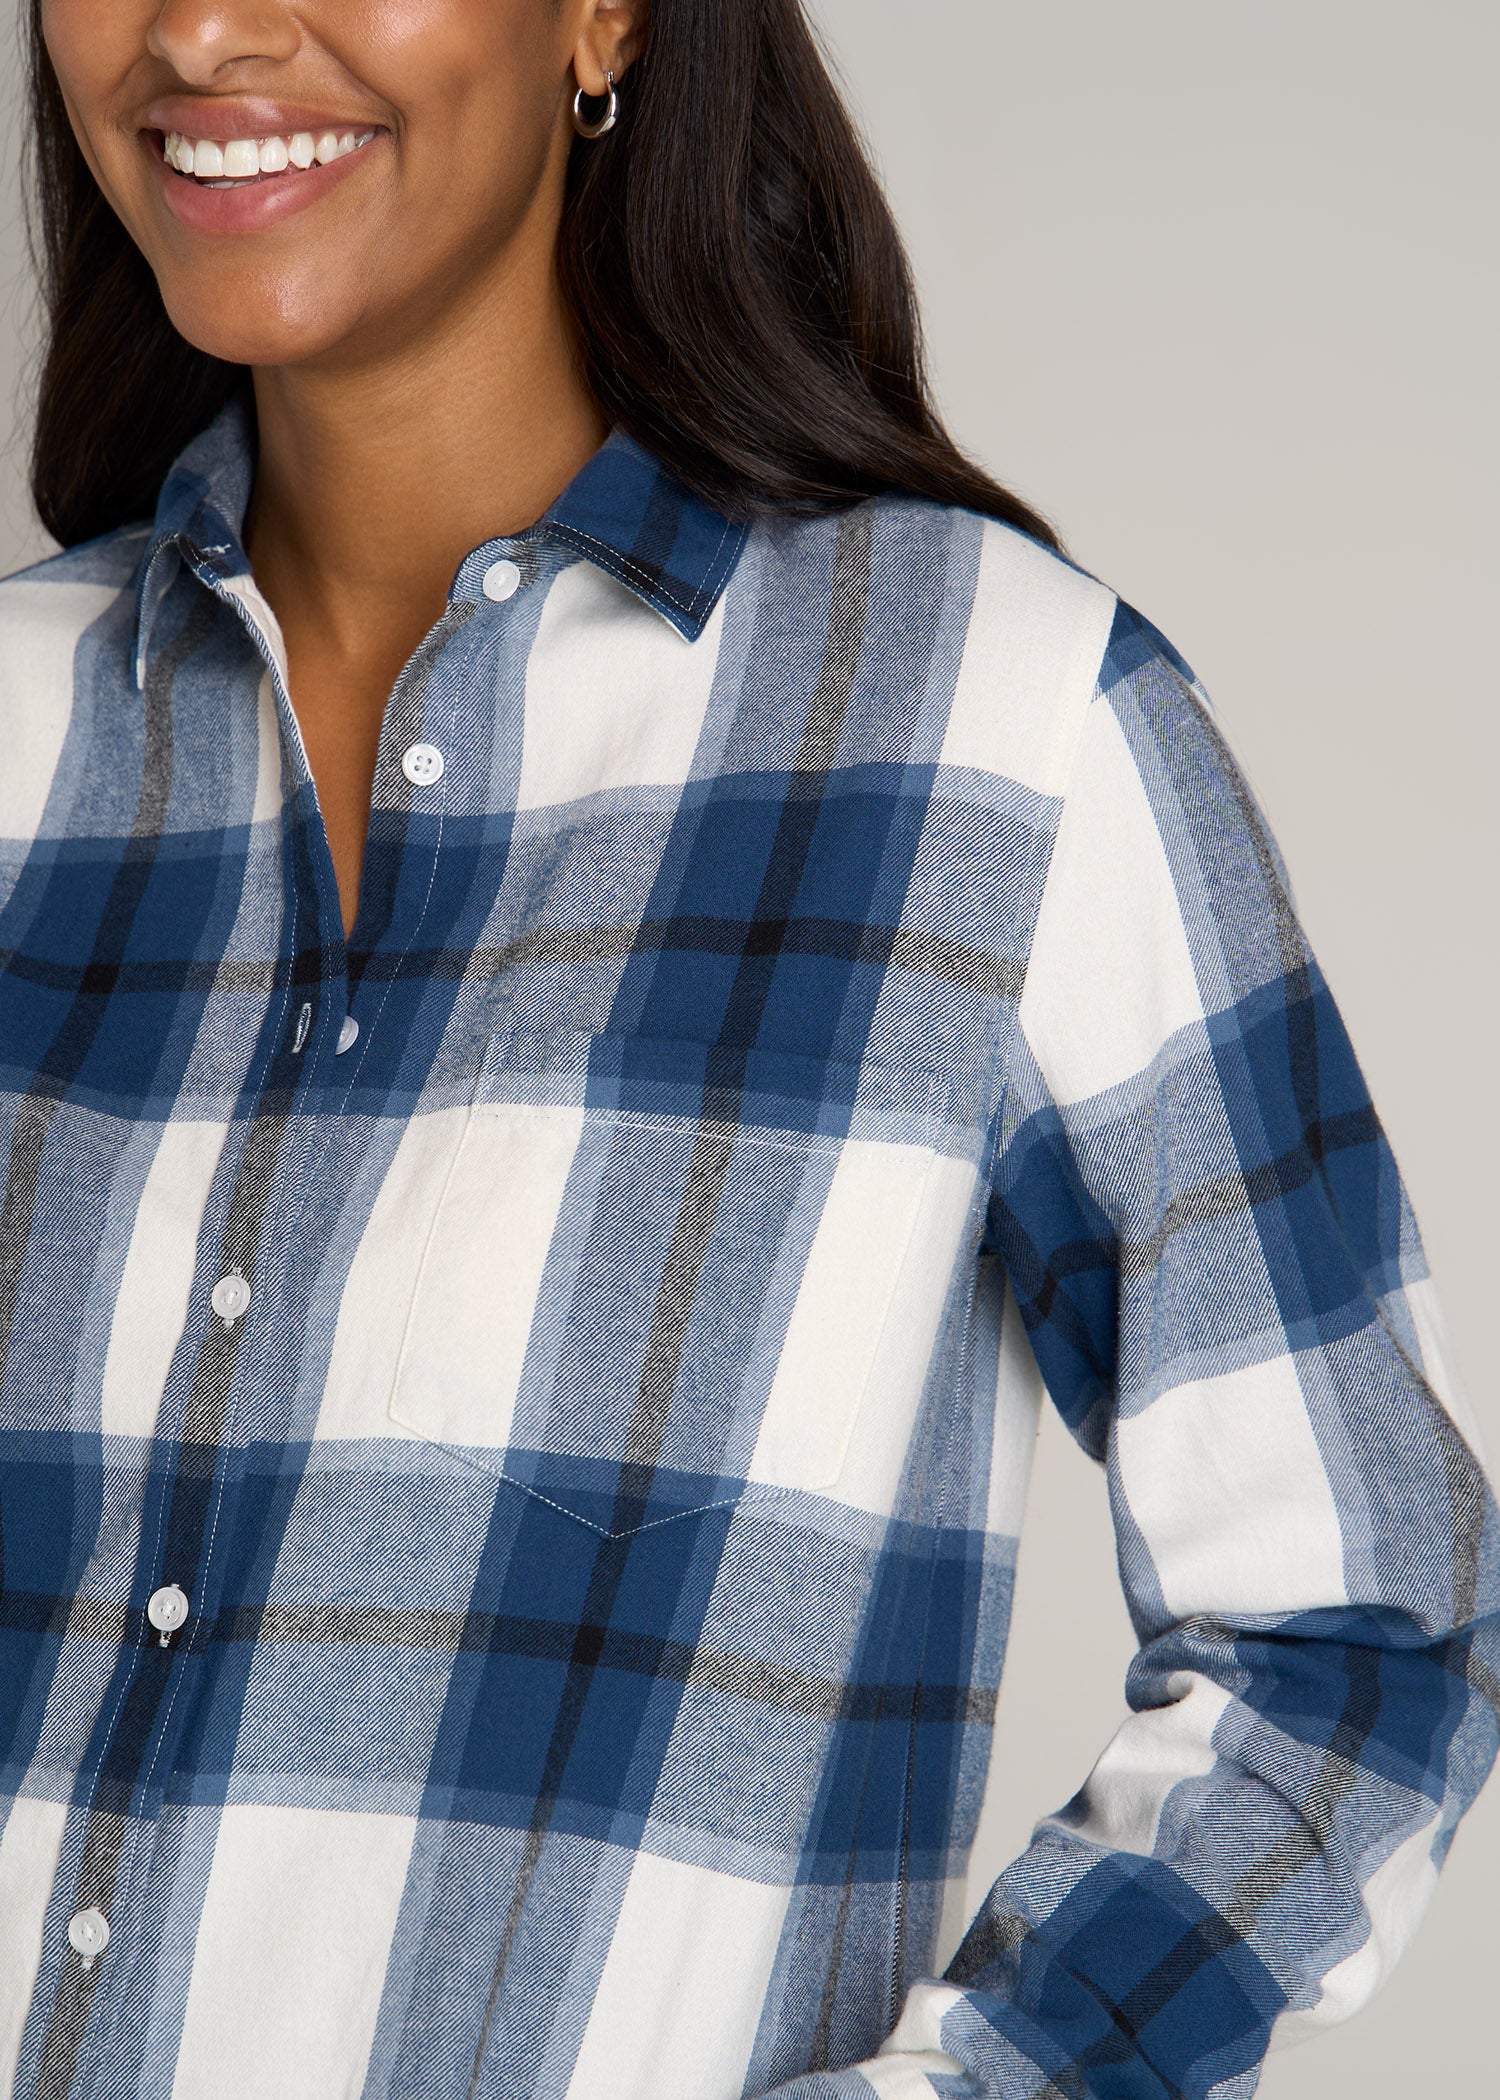 Flannel Button-Up Shirt for Tall Women in Ocean Blue and White